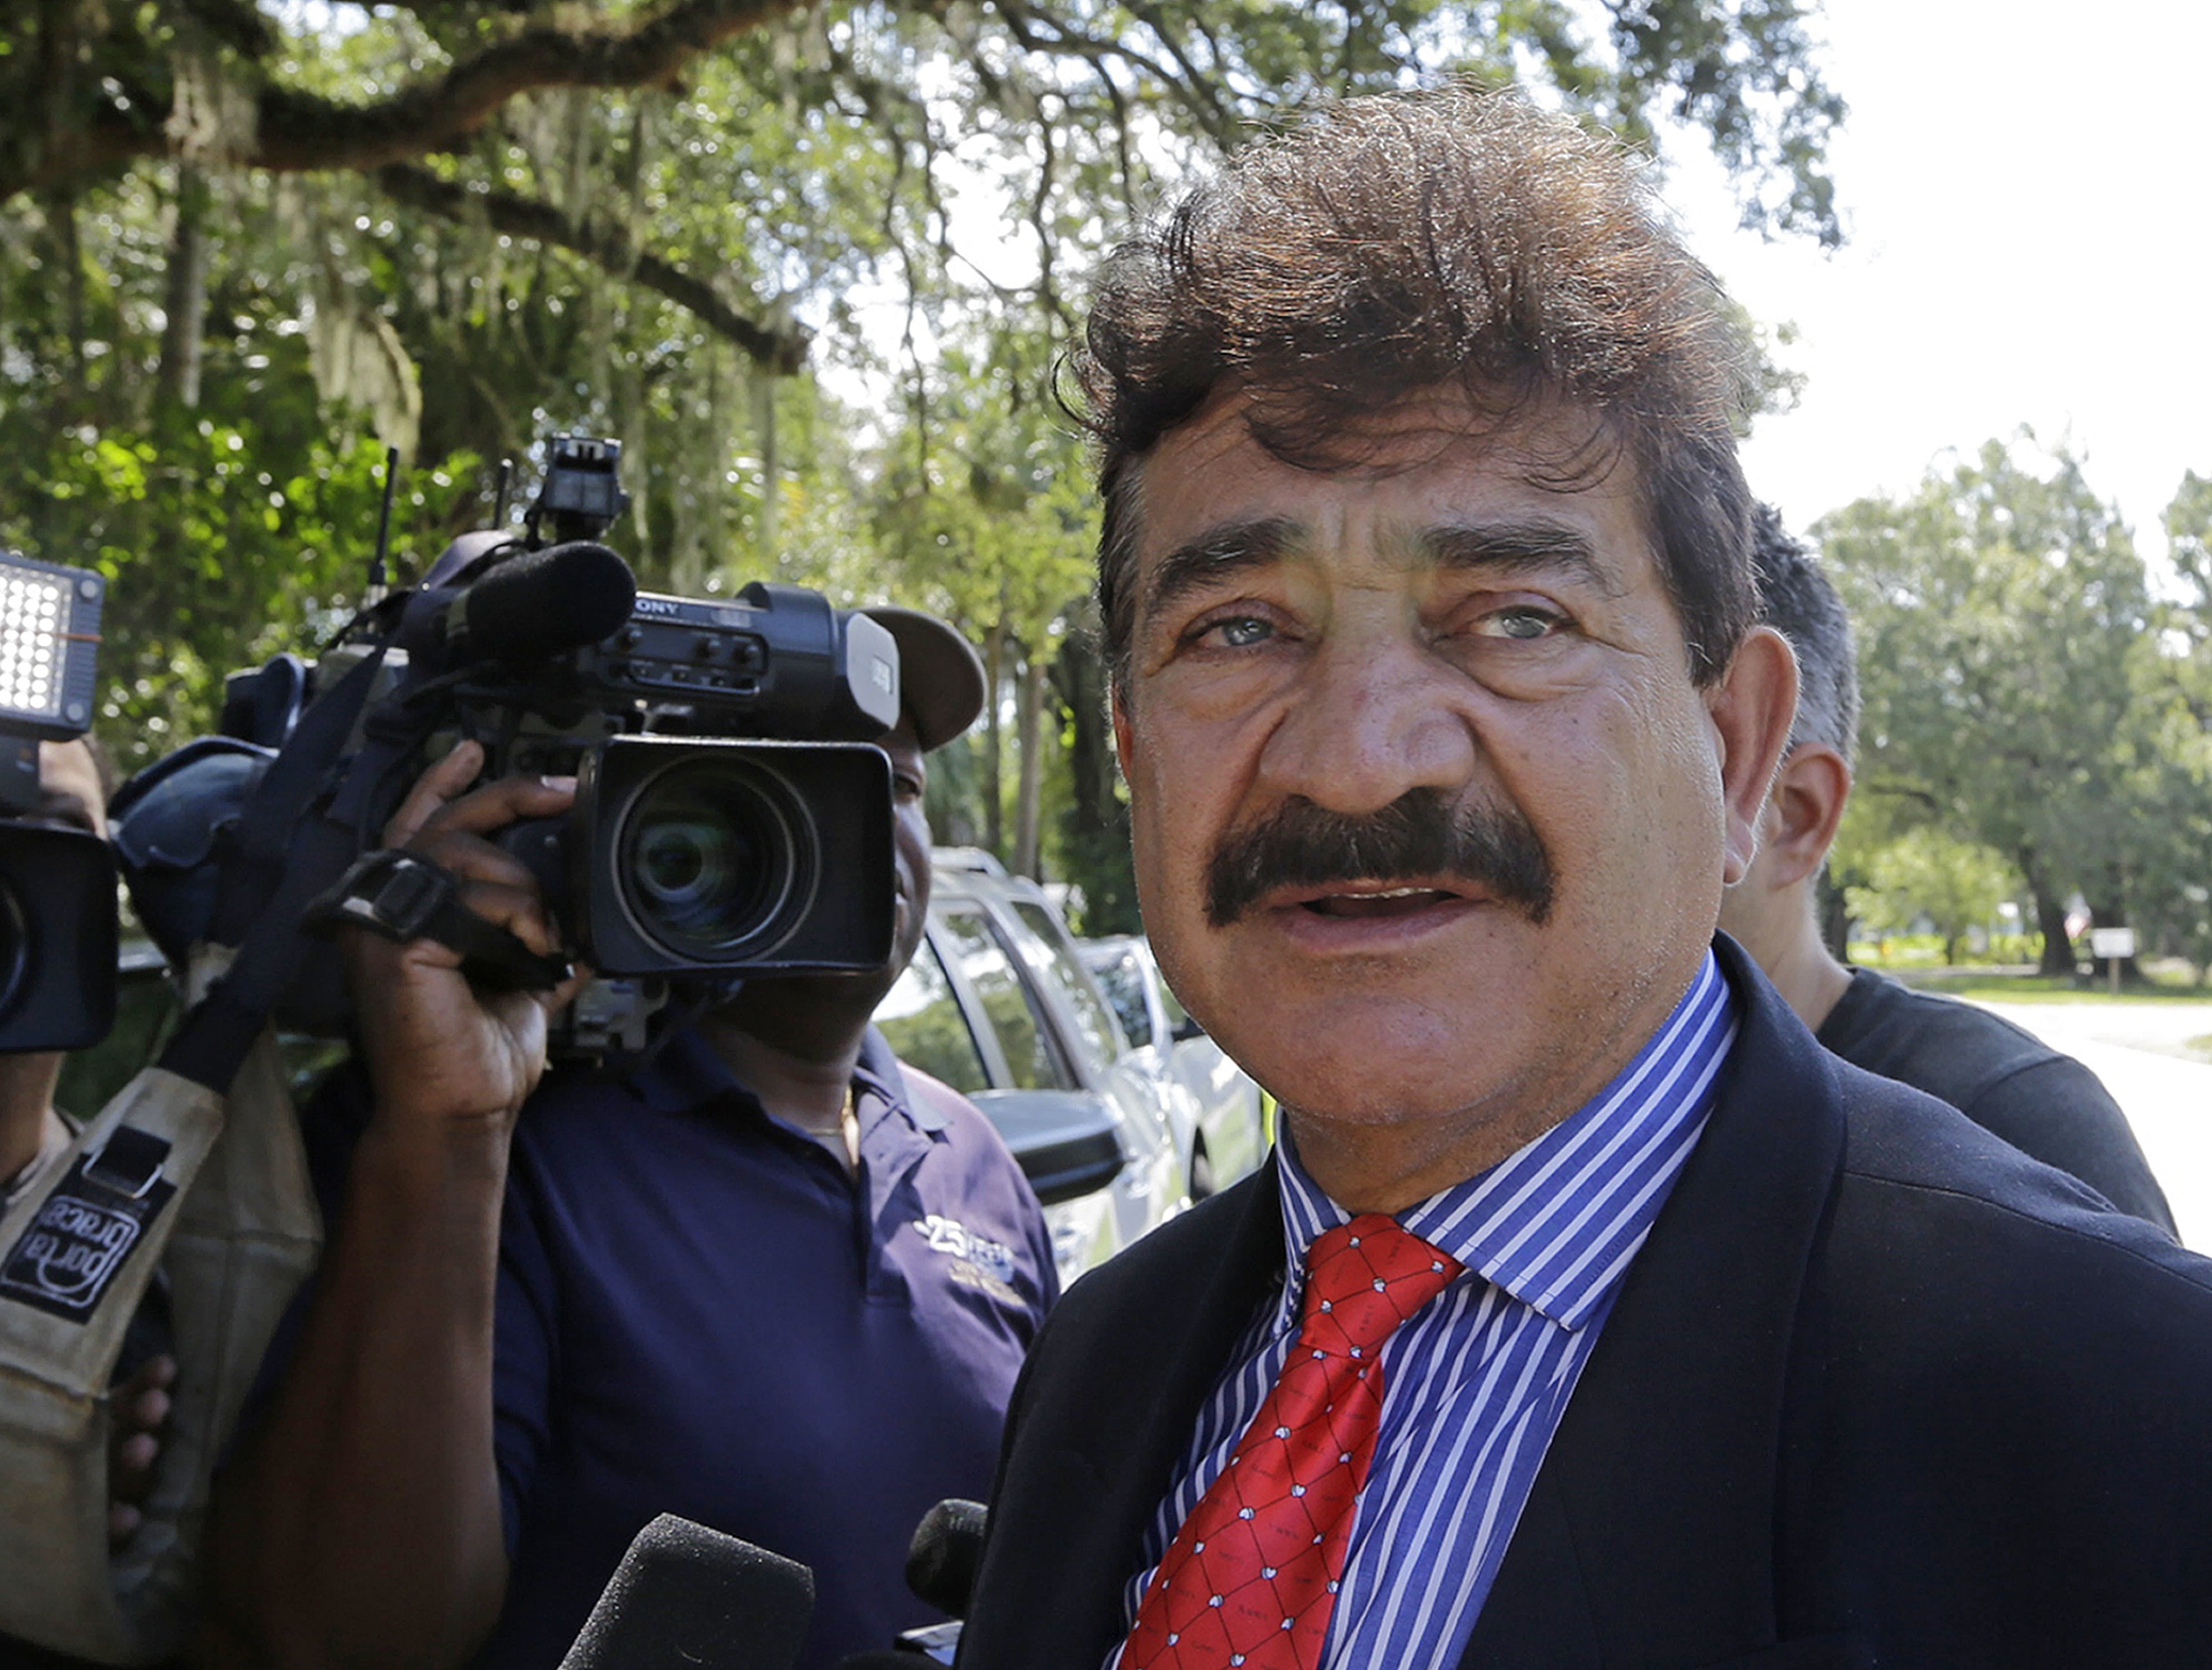 Seddique Mir Mateen, father of Omar Mateen, the shooter of the Pulse nightclub attack, talks to reporters in Fort Pierce, Fla. on June 15, 2016.